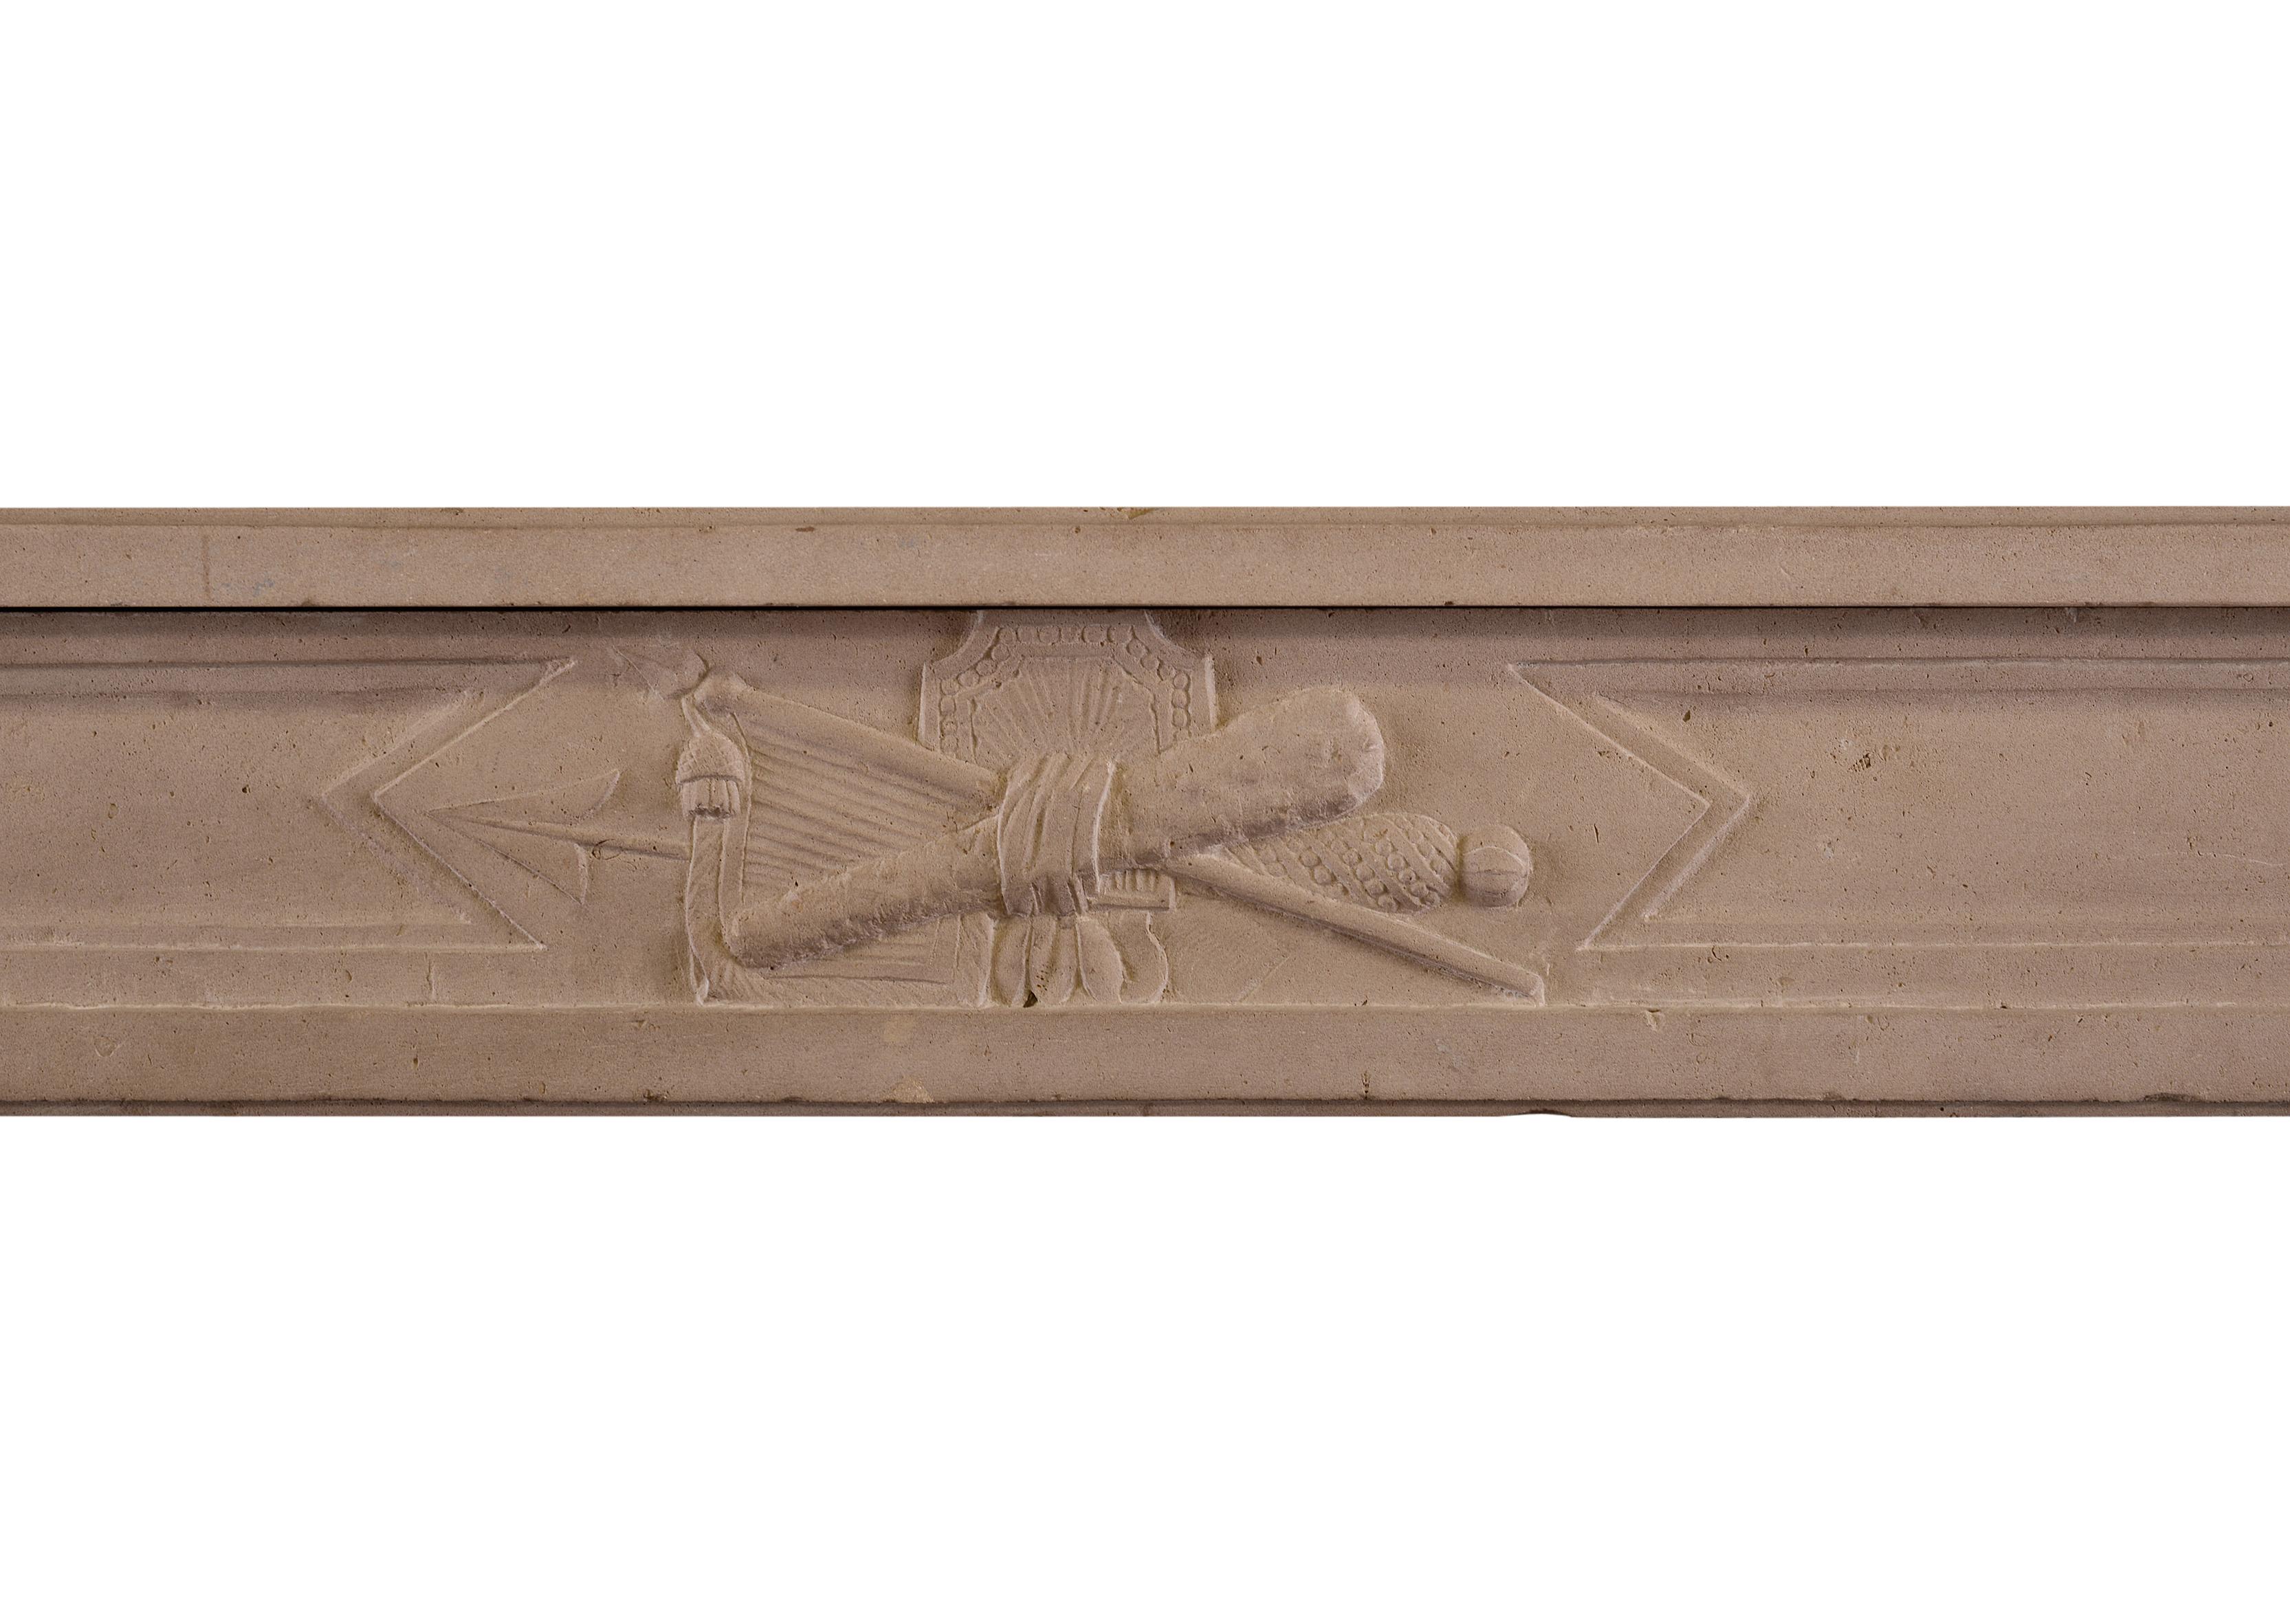 A 19th century French Louis XVI style stone fireplace. The stop-fluted jambs surmounted by frieze with carved arrow and musical instrument. Moulded shelf above.

Measurements:
Shelf width: 1335 mm 52 1/2 in
Overall height: 1065 mm 41 7/8 in
Opening